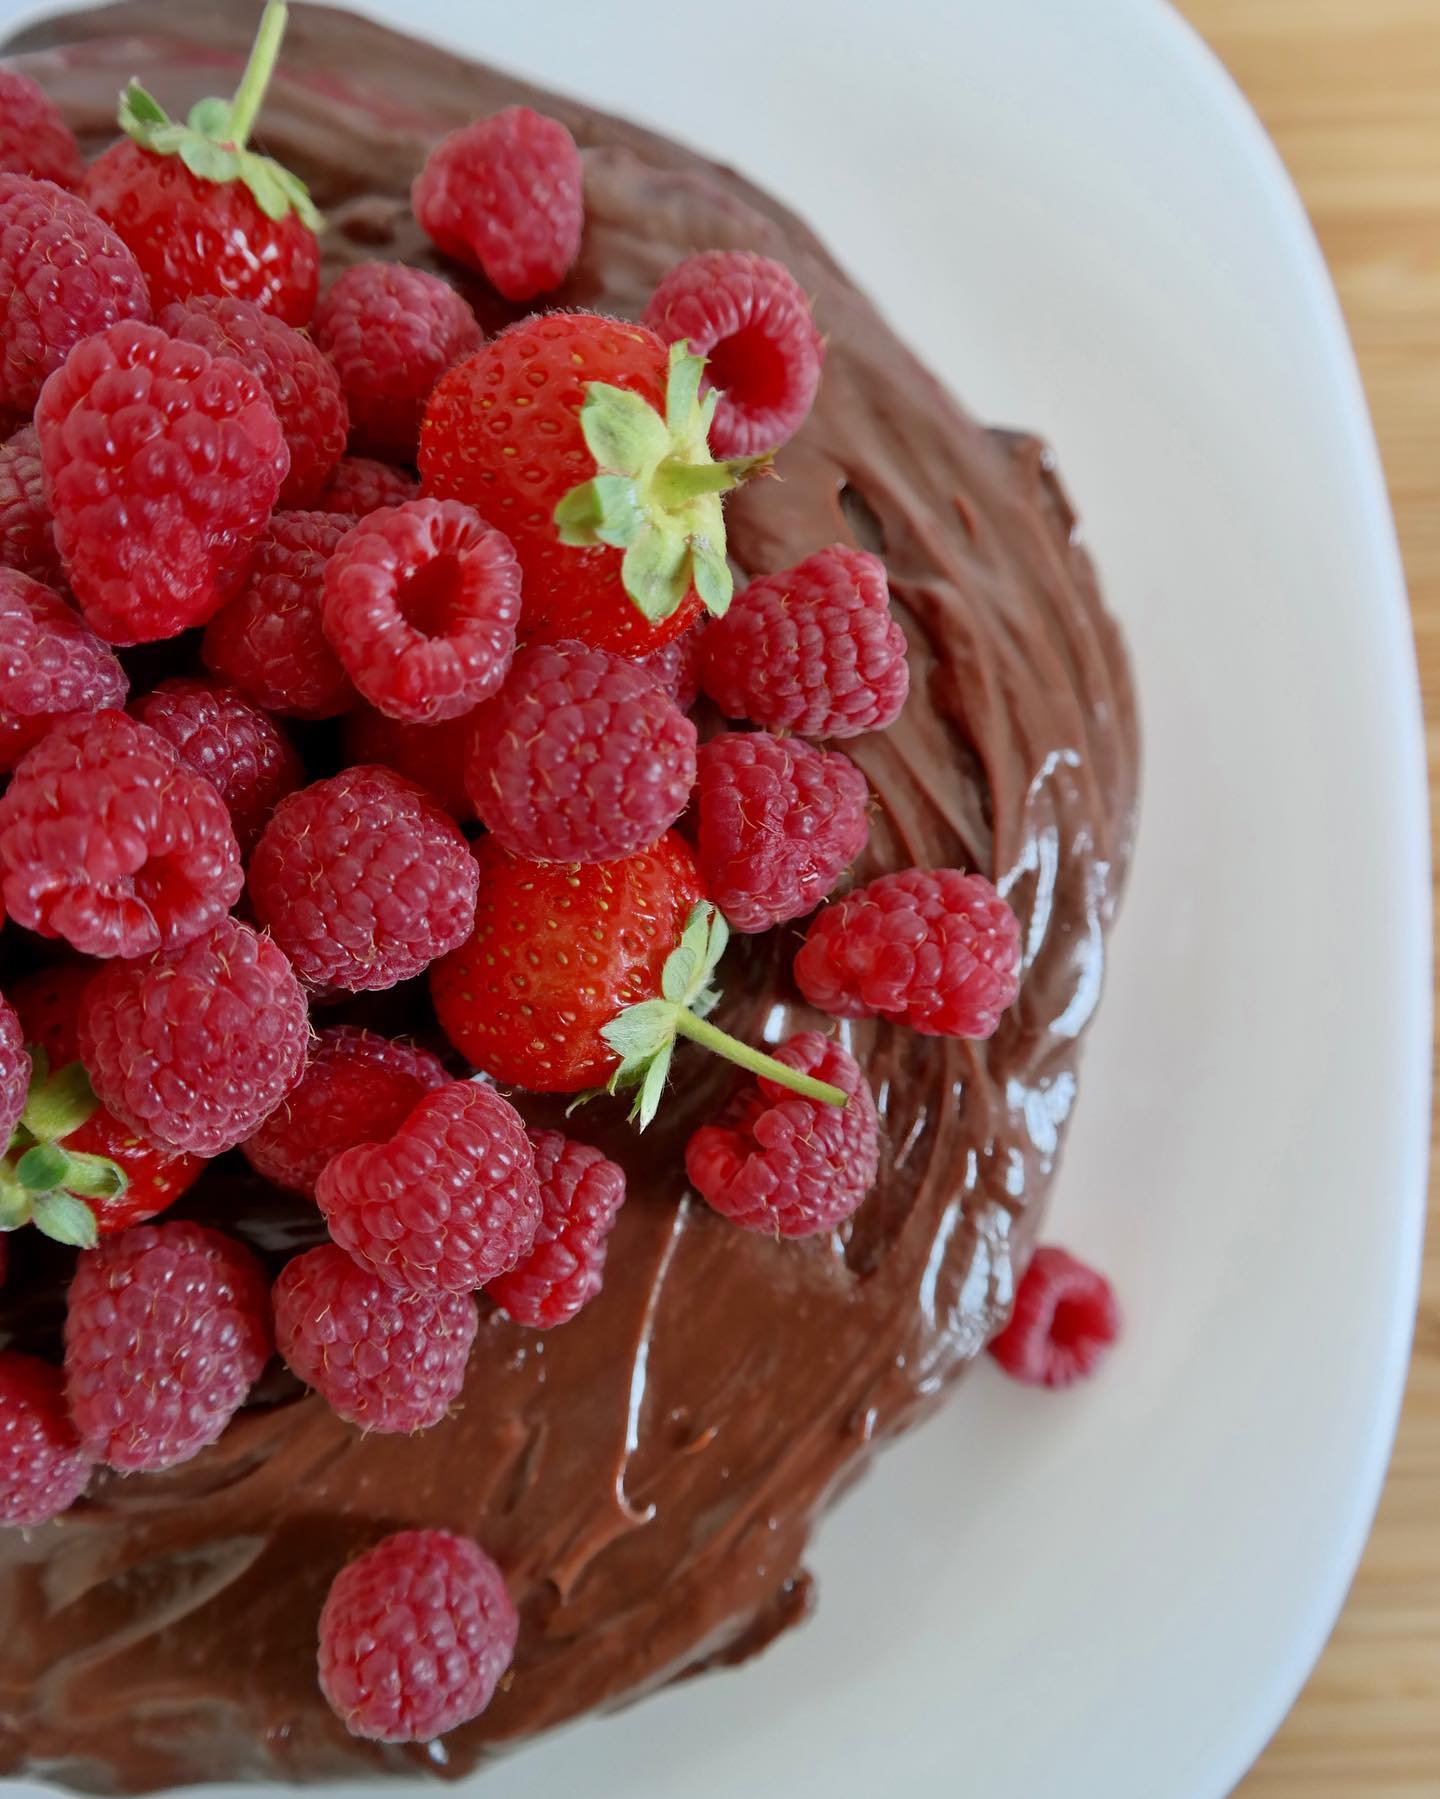 I’ve been meaning to bake a raspberry and chocolate cake for so long. Adding an espresso shot ☕️ into the batter was the best choice, it really elevated the flavors 🤤
.
.
.
.
#baking #bake #chocolate #chocolatecake #cake #raspberries #homebaked #bakingfromscratch #ilovebaking #chocolatelover #chocolateaddict #dessert #delicious #sweet #sweettooth #foodblogger